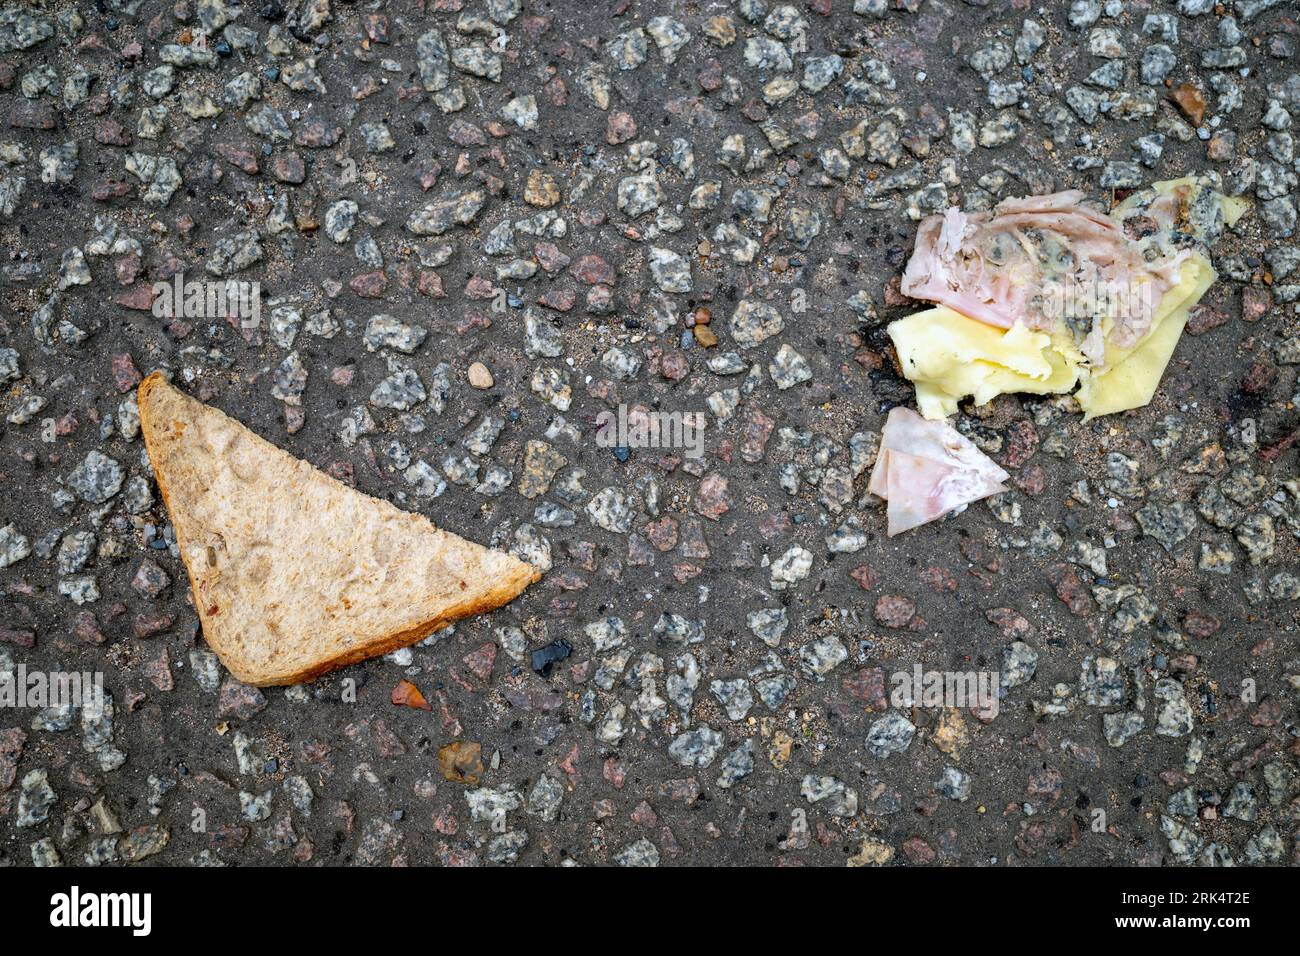 Ham and cheese sandwich fallen onto a road Stock Photo